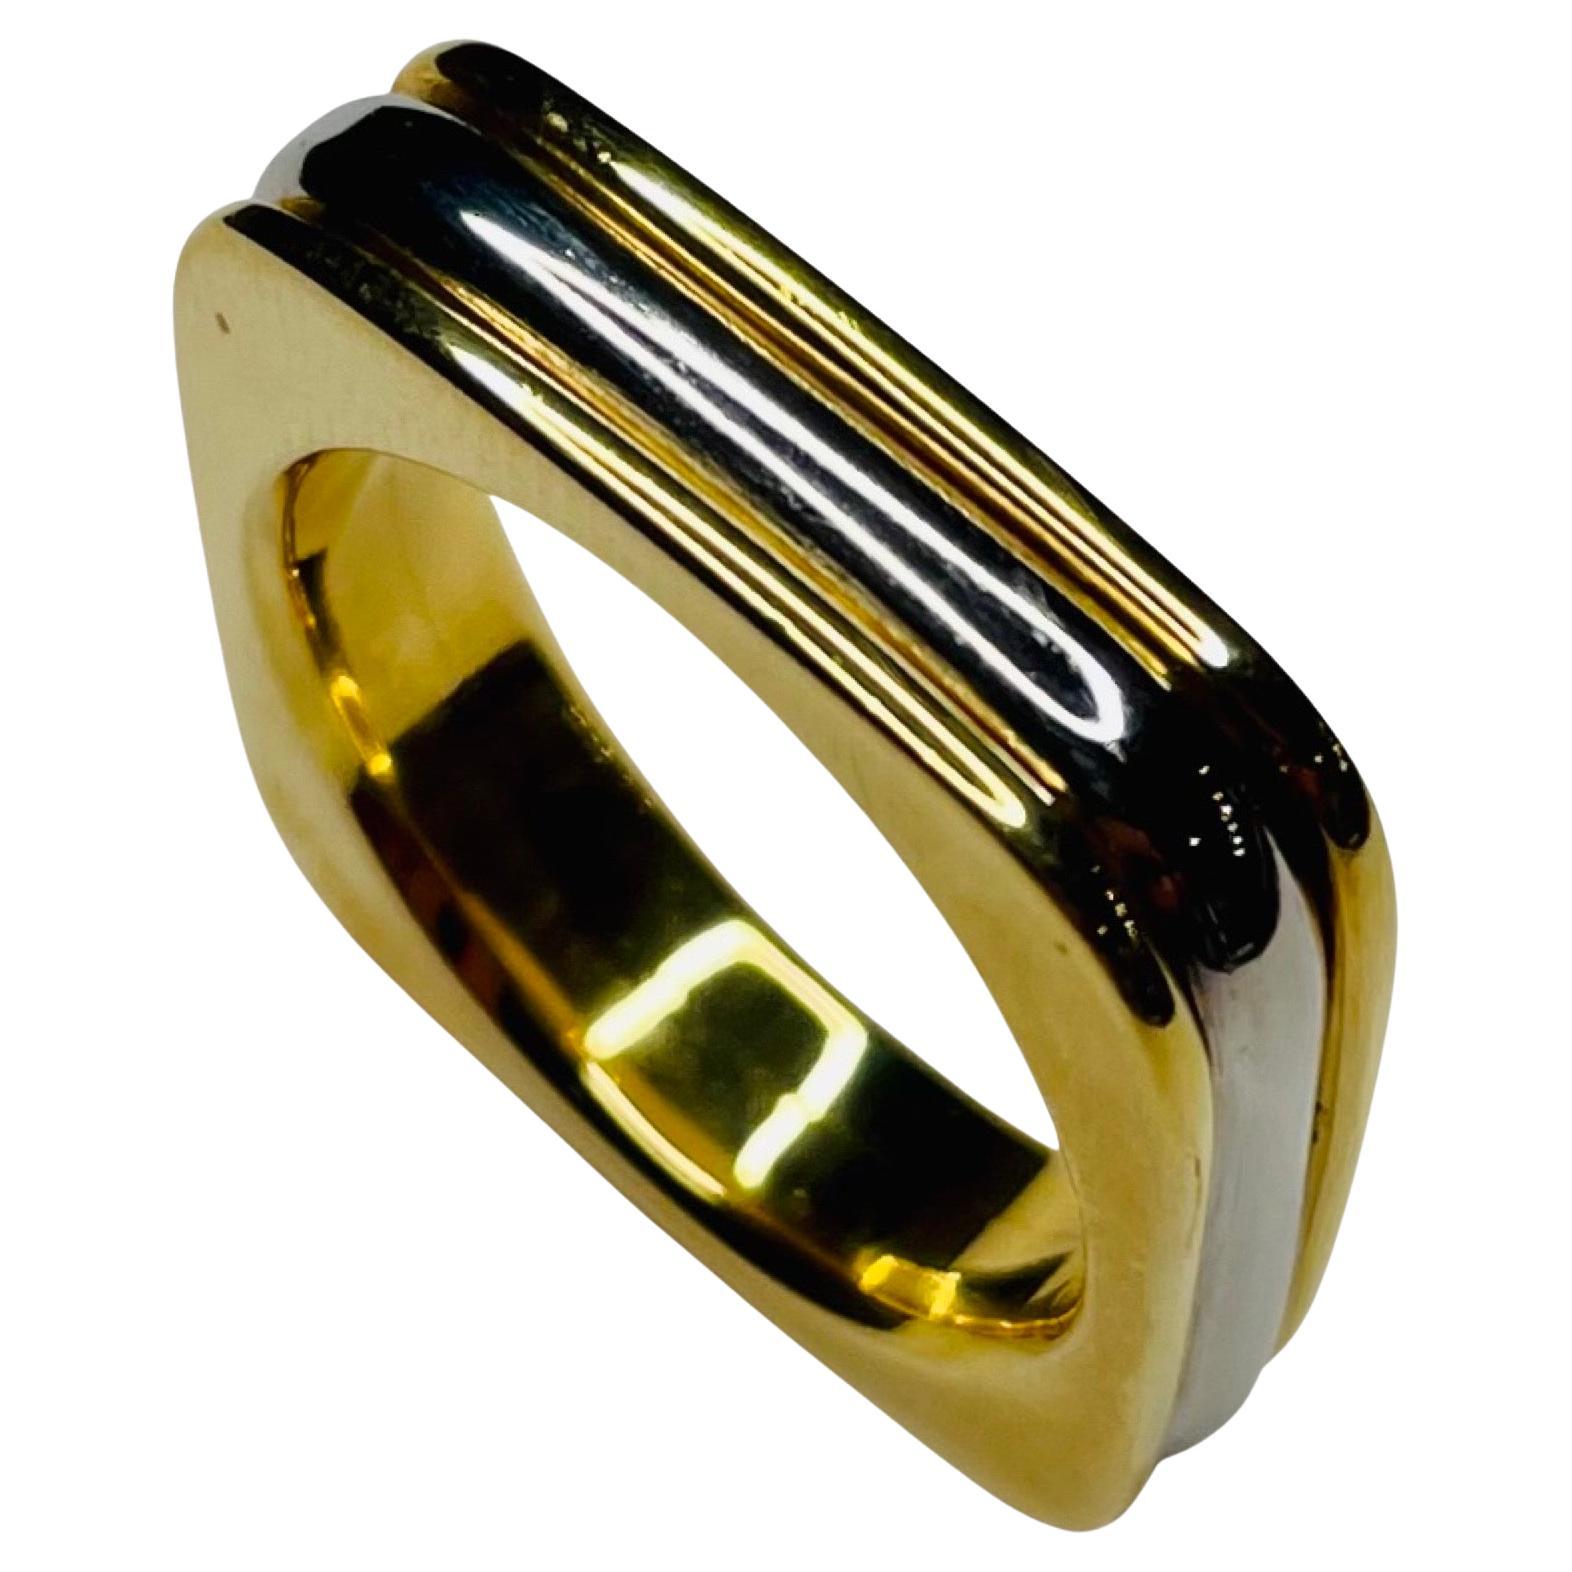 Lithos Platinum and 18K Yellow Gold Square Wedding Band